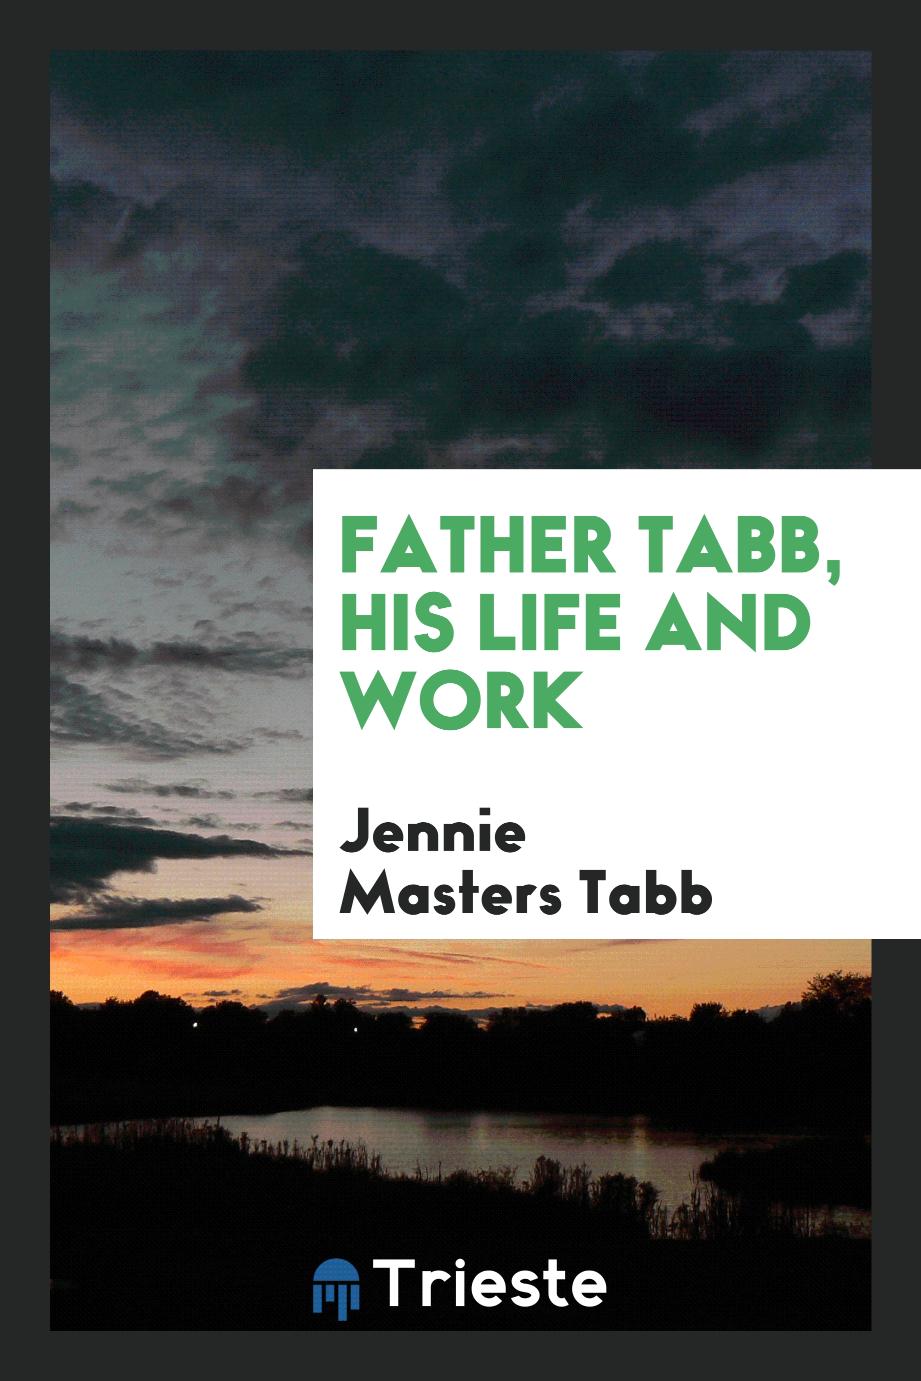 Father Tabb, his life and work